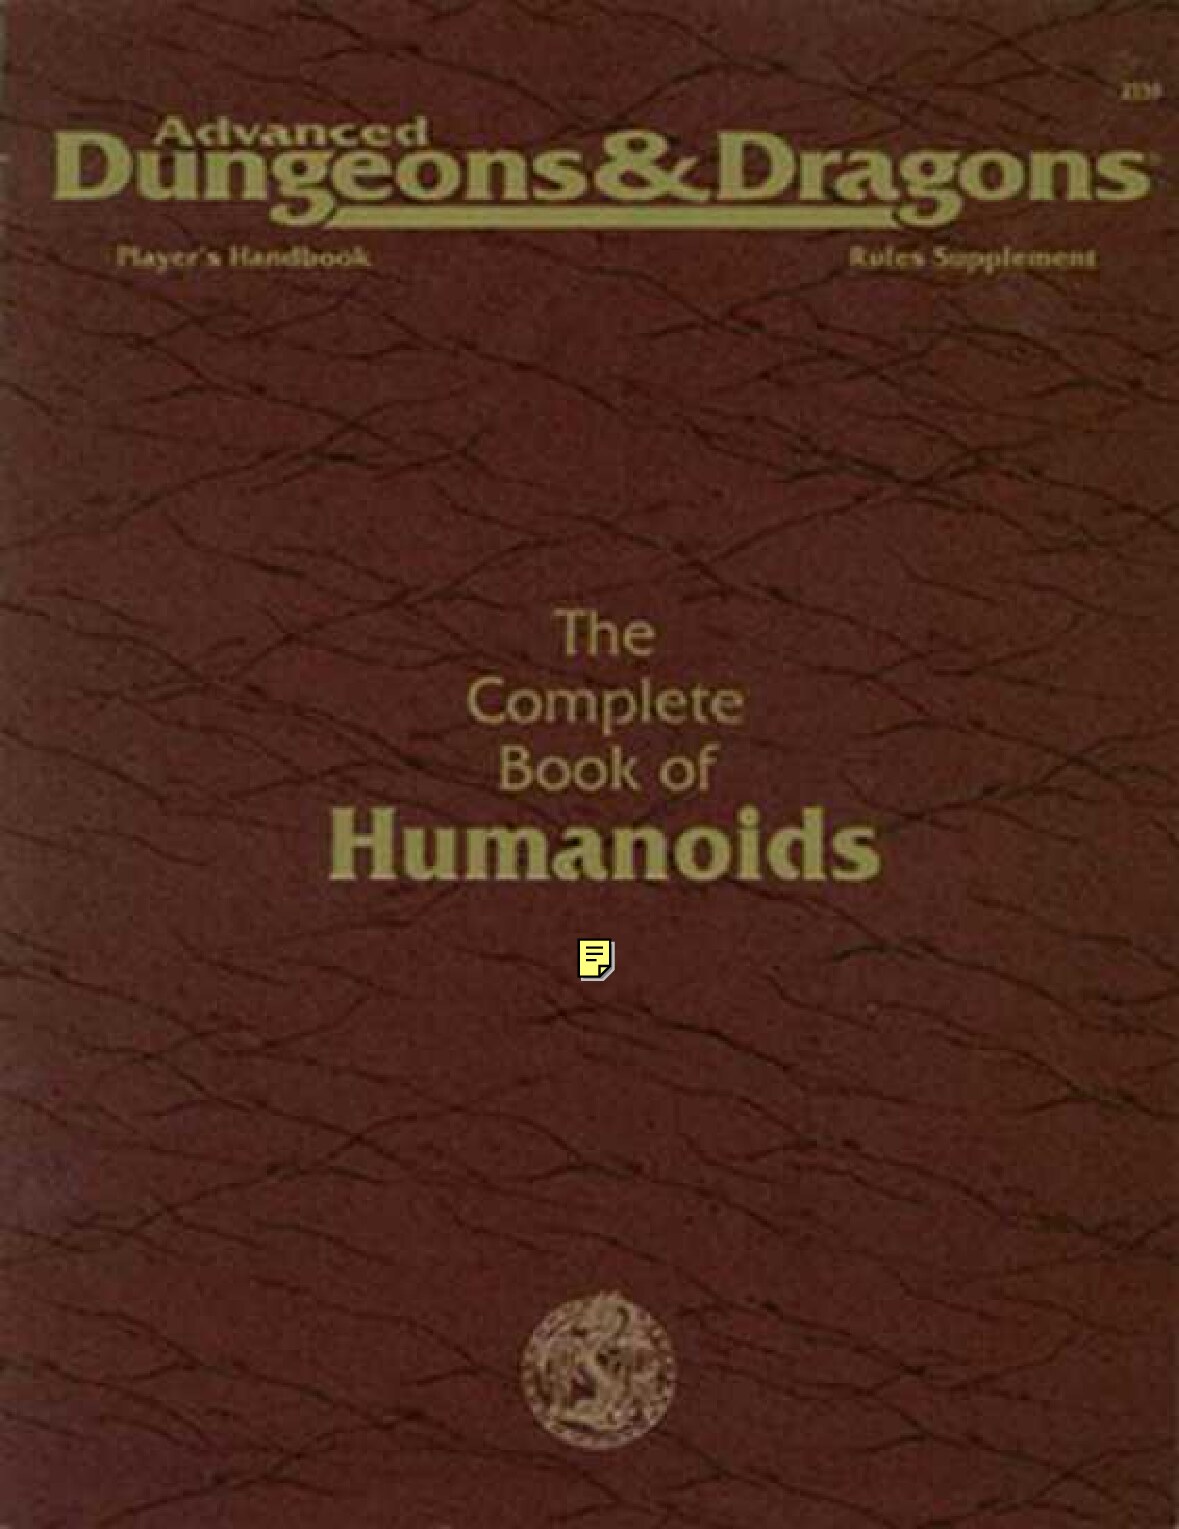 PHBR10 - The Complete Book of Humanoids (2135)